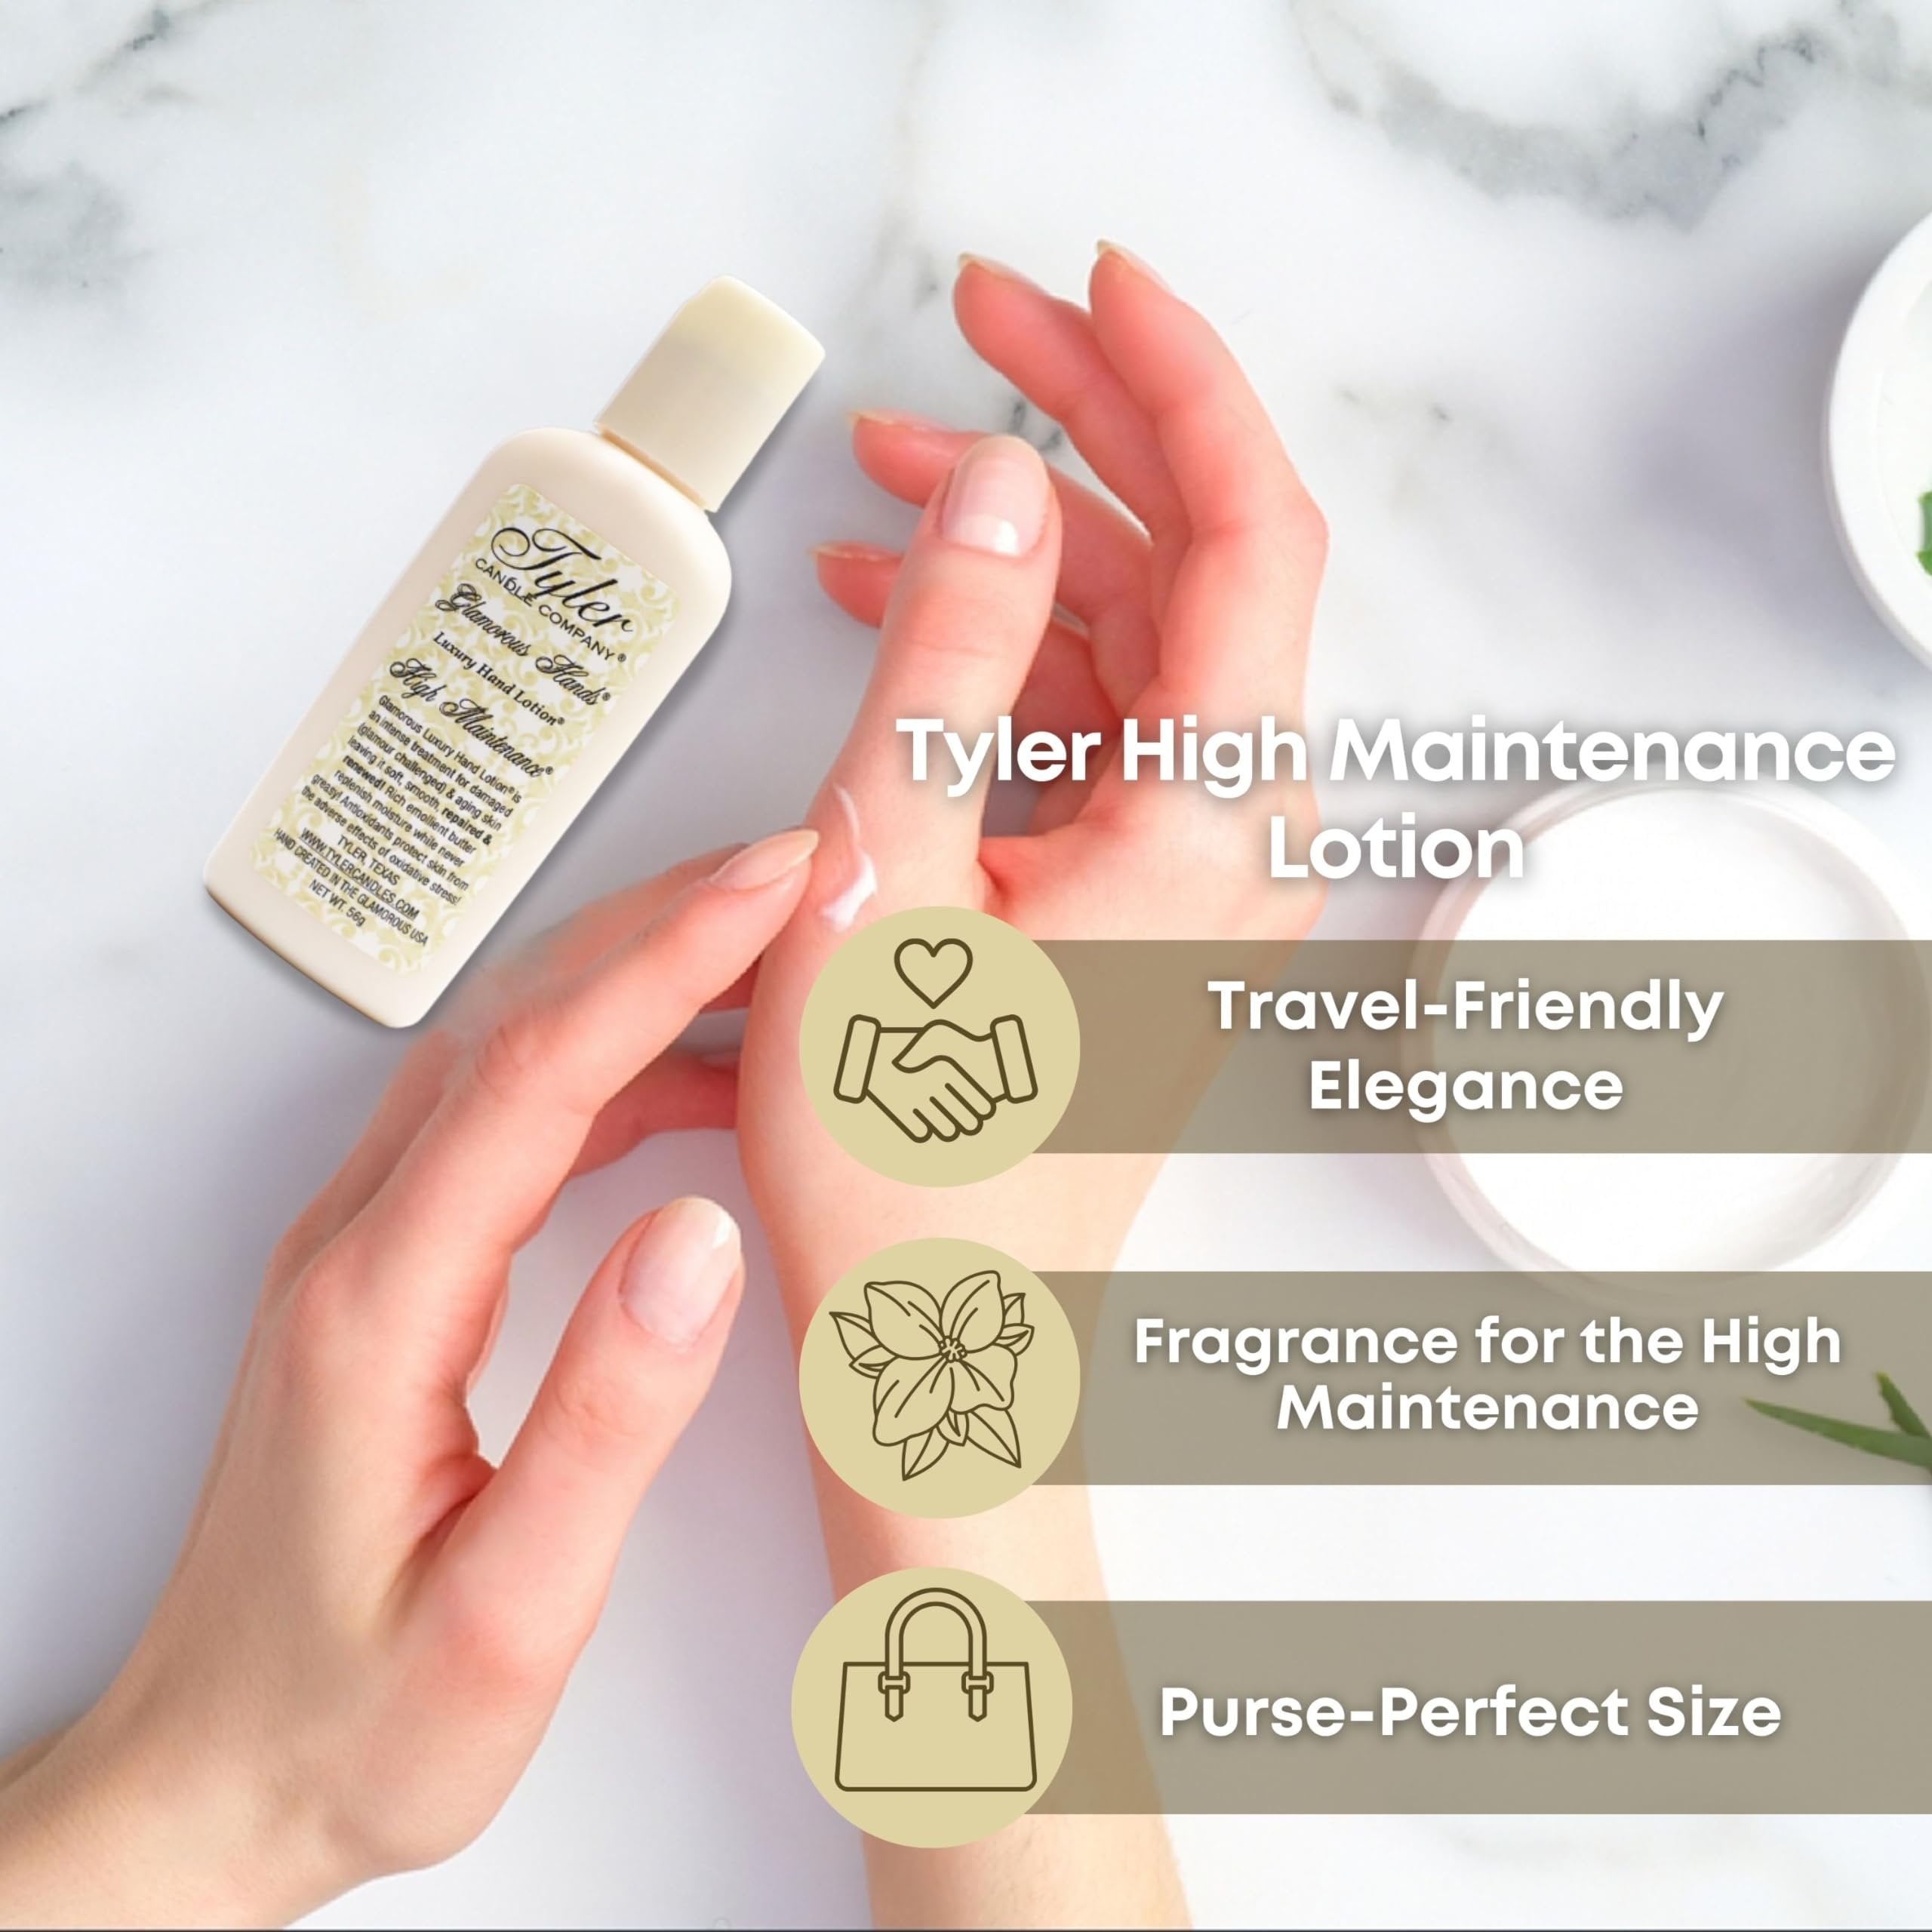 Tyler High Maintenance Hand Lotion - Scented and Small Hand Cream For Dry Hands- 2 Oz Travel Size Luxury Hand Moisturizer and Multi-Purpose Key Chain